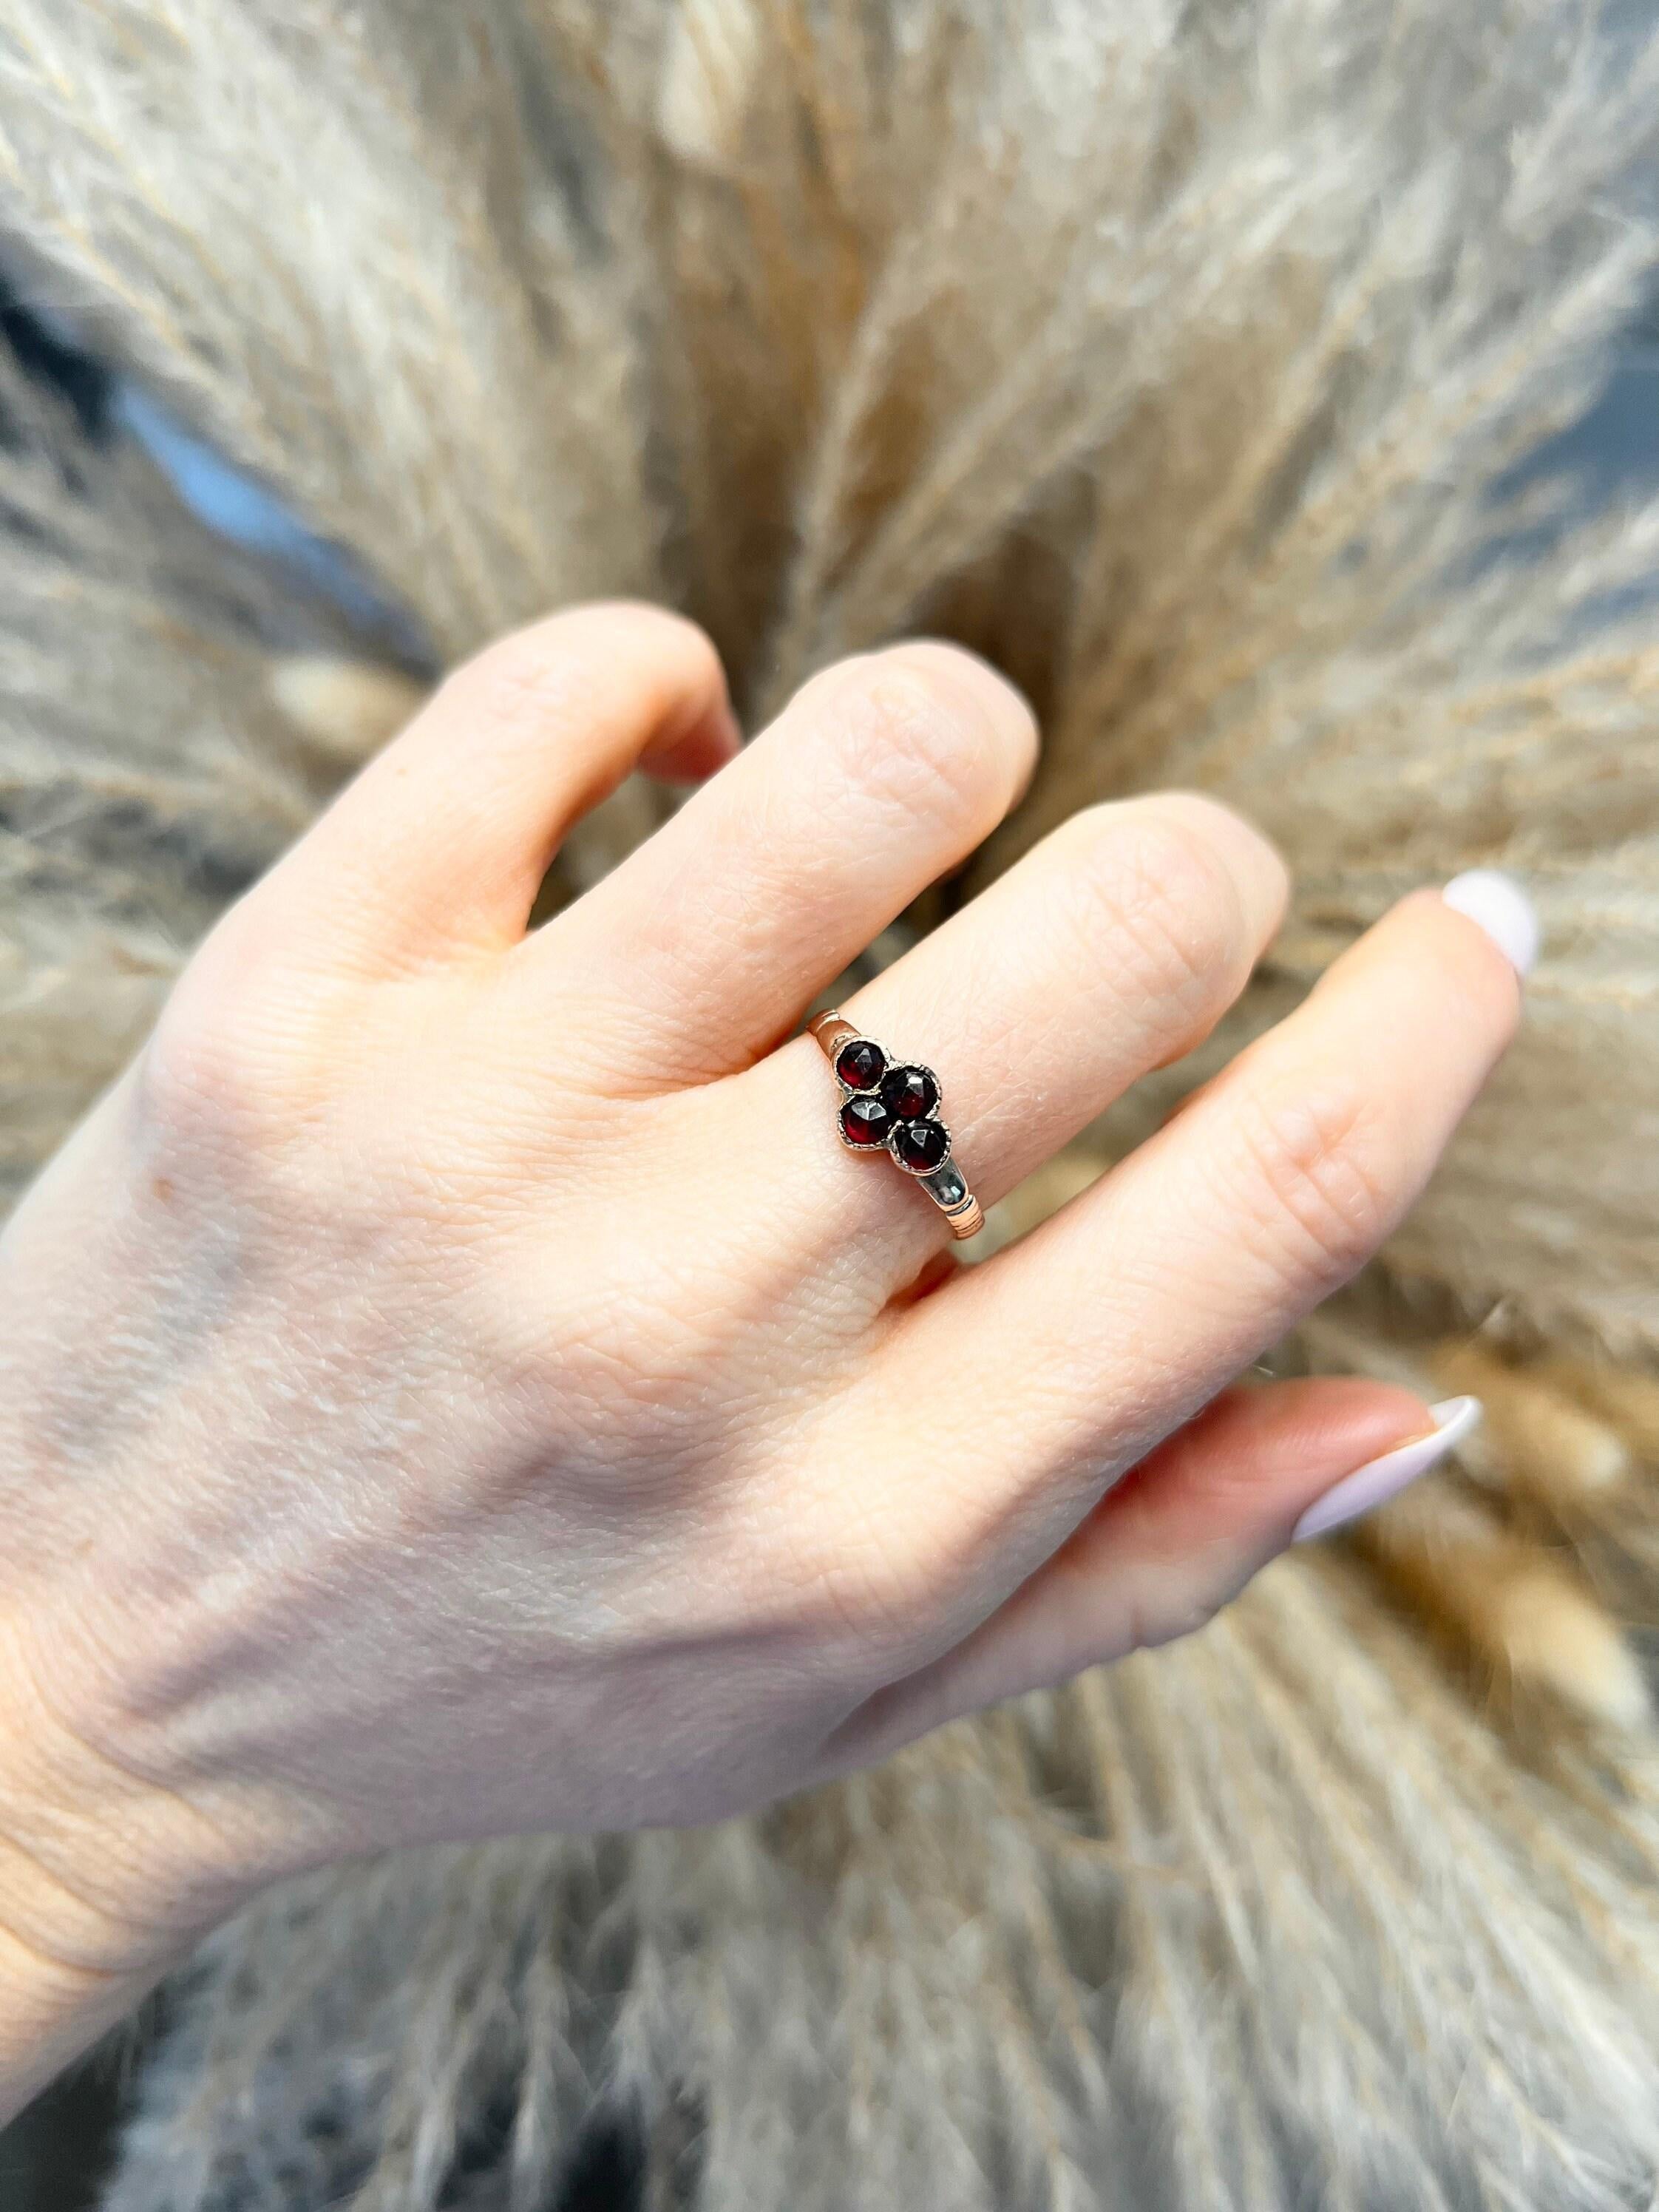 Antique Bohemian Garnet Ring 

9ct Rose Gold Tested 

Circa 1890

Beautiful, Four Stone Victorian Ring. Set with Faceted Bohemian Garnet 

Face of The Ring Measures Approx Height 7.3mm & Width 10.3mm

UK Size N 1/2

US Size 6 3/4

Can be resized